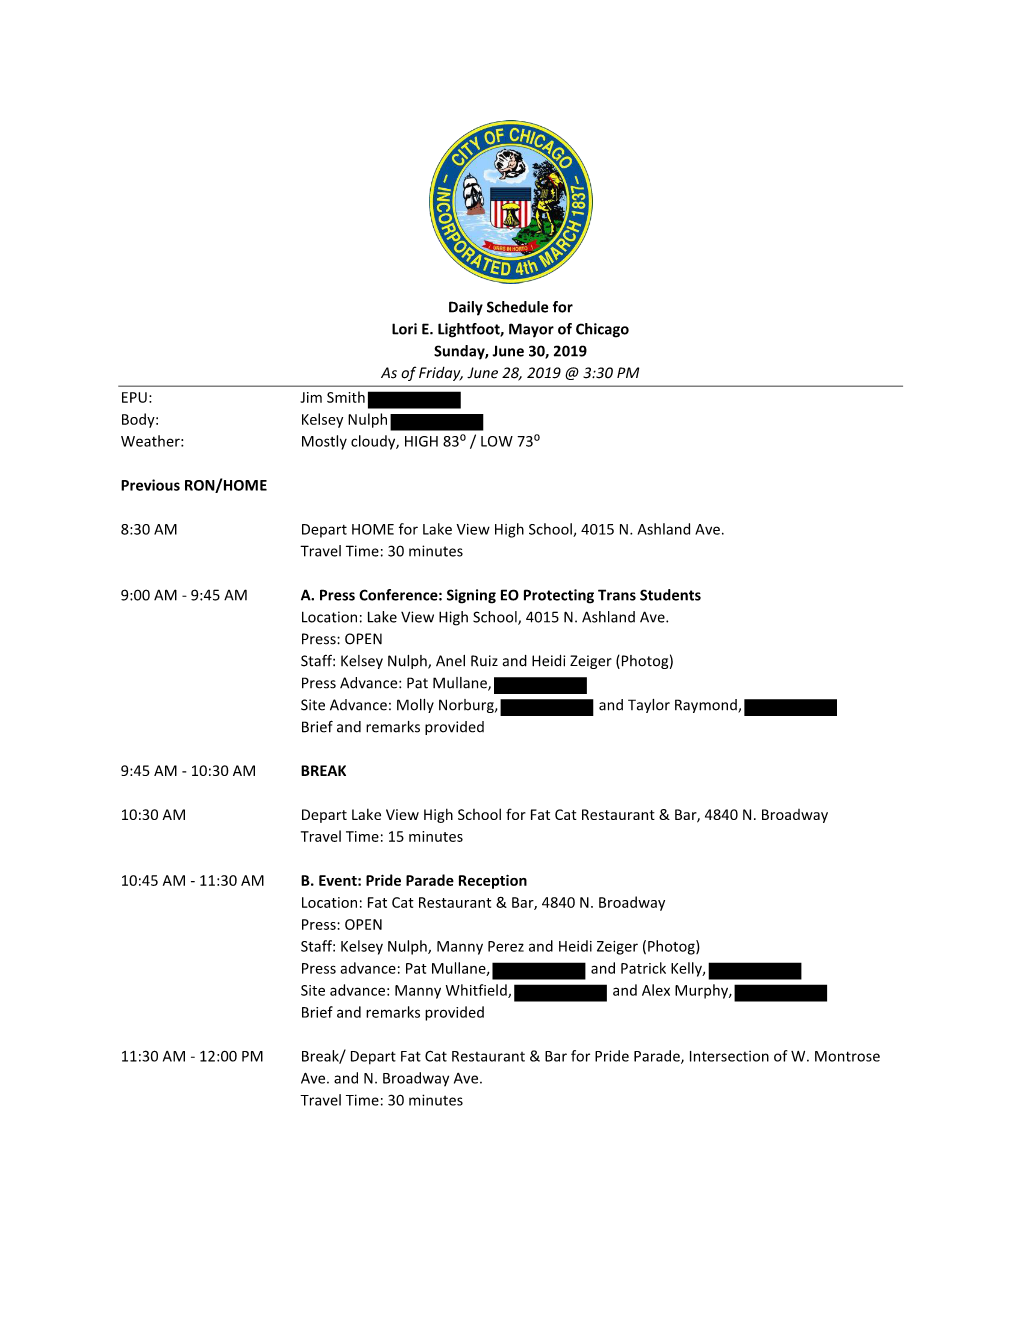 Daily Schedule for Lori E. Lightfoot, Mayor of Chicago Sunday, June 30